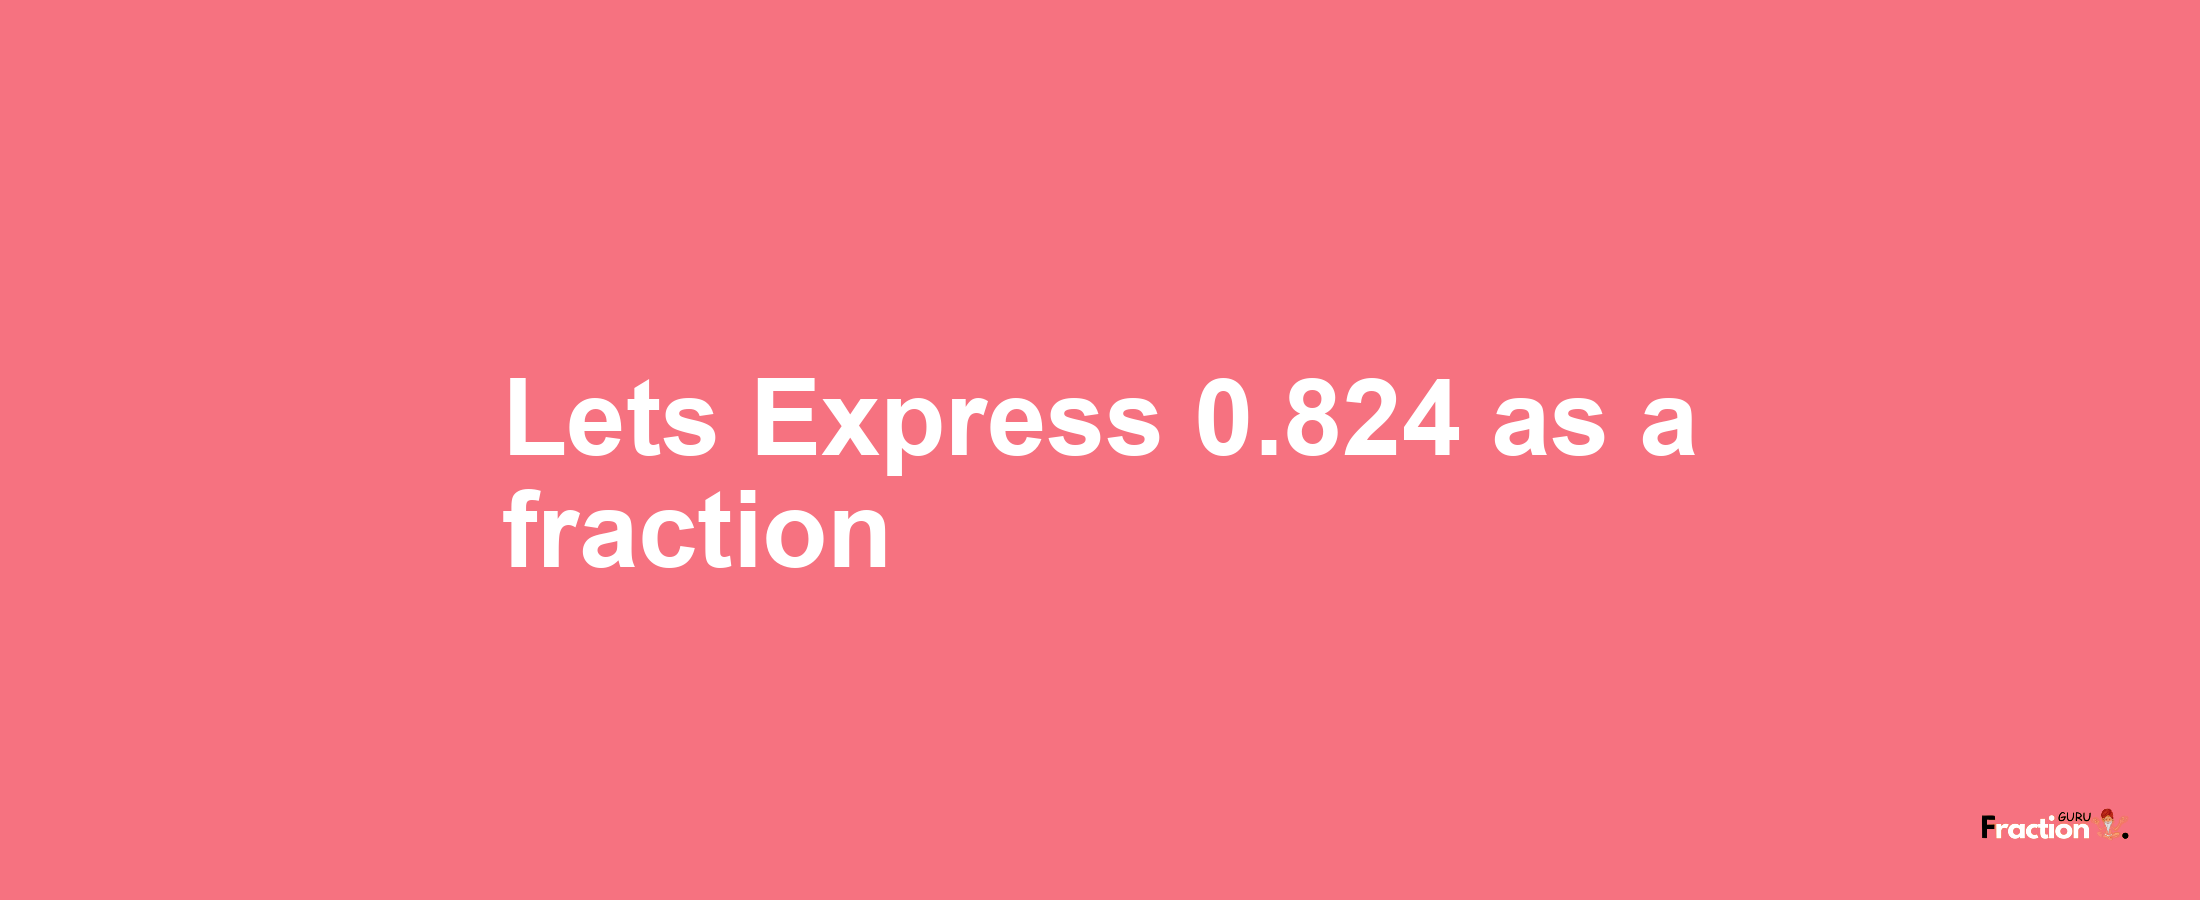 Lets Express 0.824 as afraction